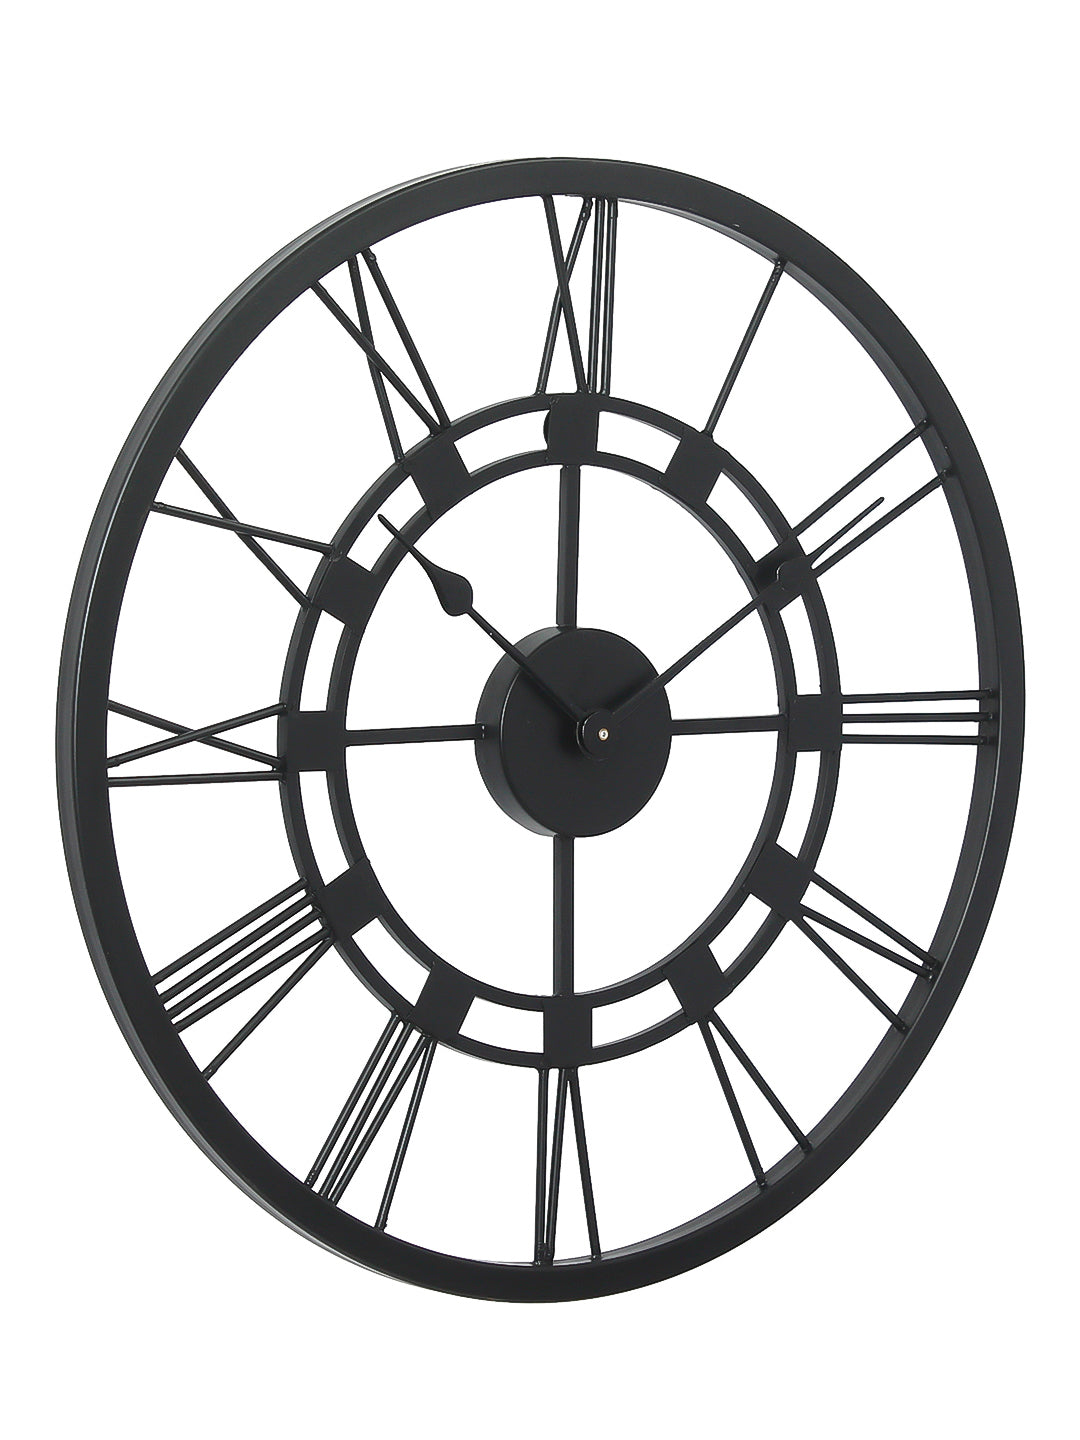 Black Iron Round Handcrafted Analog Roman Number Wall Clock Without Glass 5